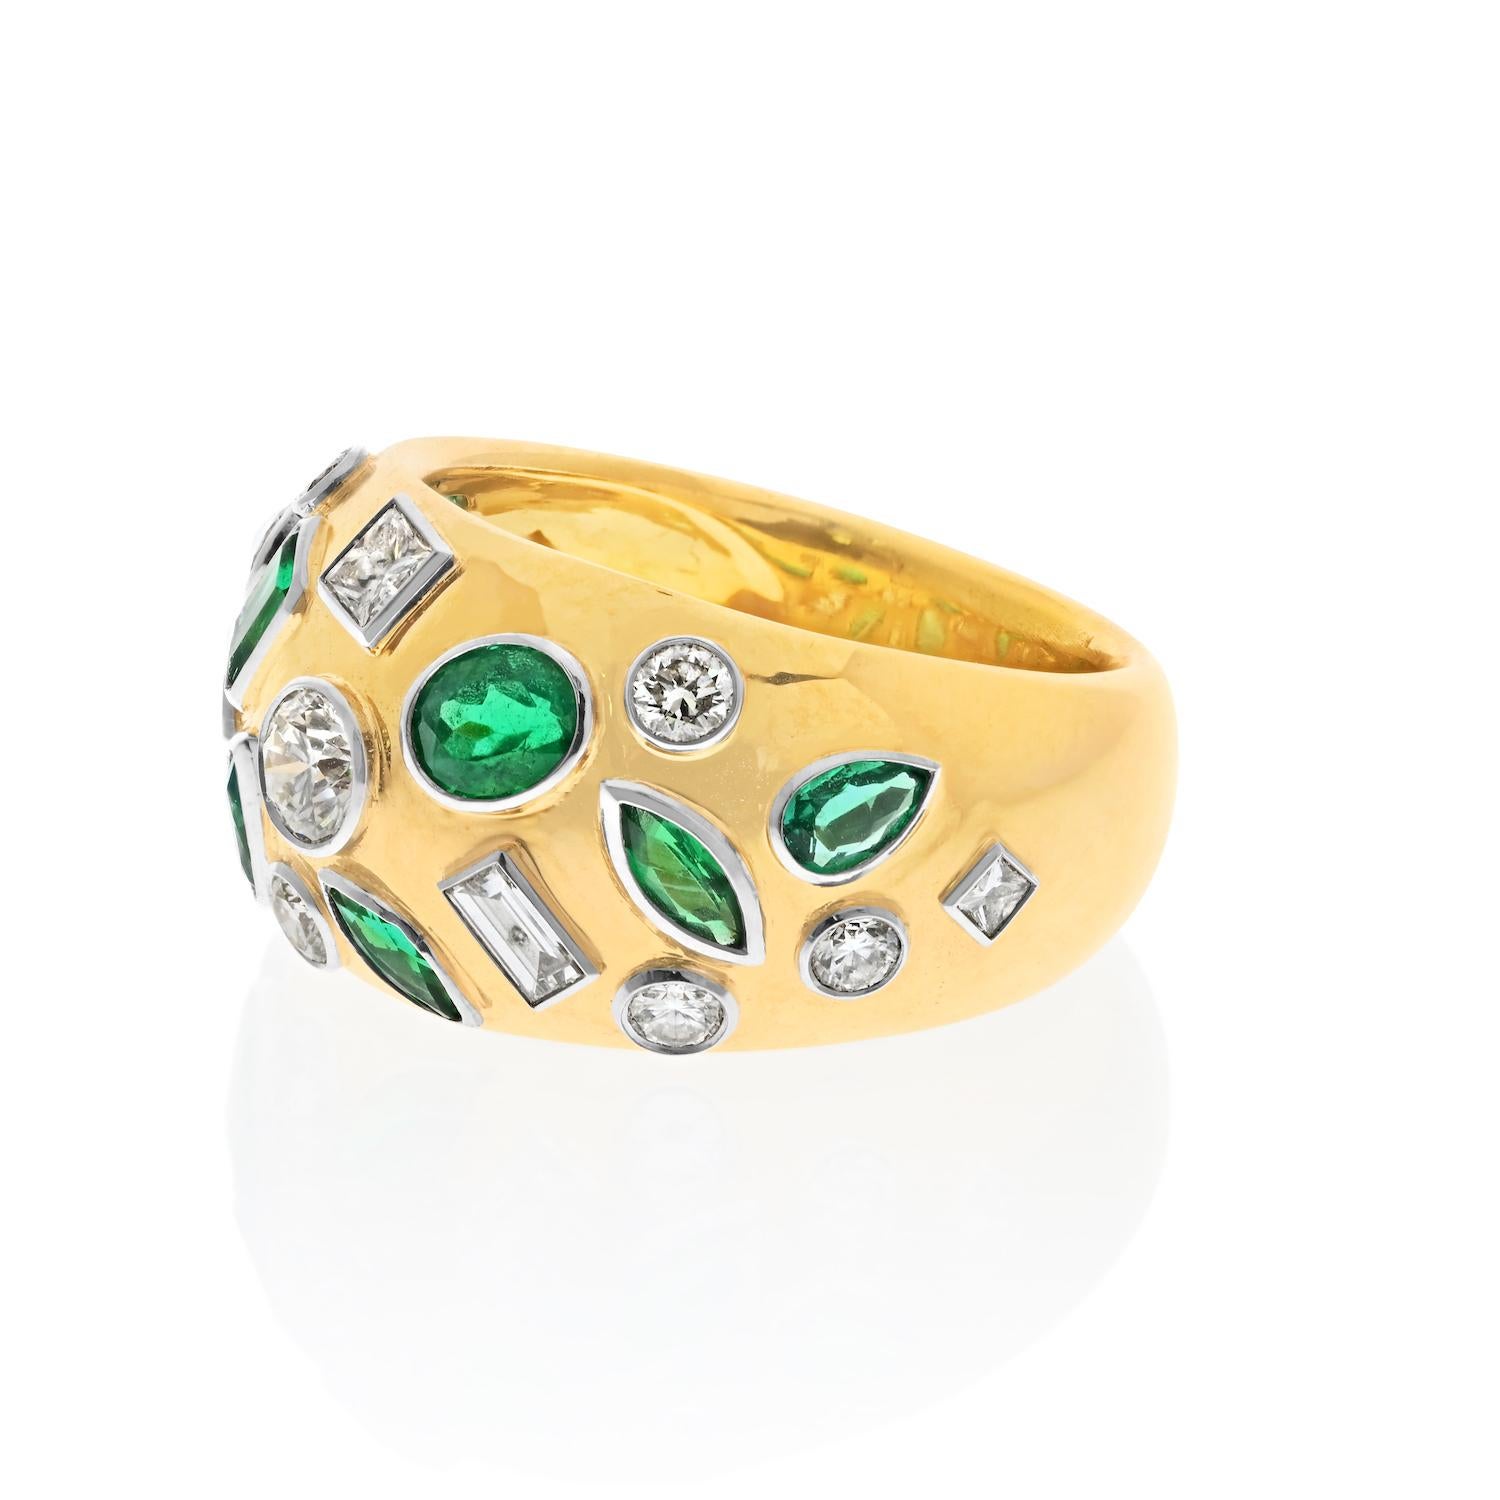 Elegance in Every Detail: Your Emerald and Diamond Wide Band Ring.

Indulge in the luxurious beauty of this wide band ring, adorned with bright burnish and bezel-set diamonds and vibrant green emeralds. Whether you wear it as a stylish cigar band or